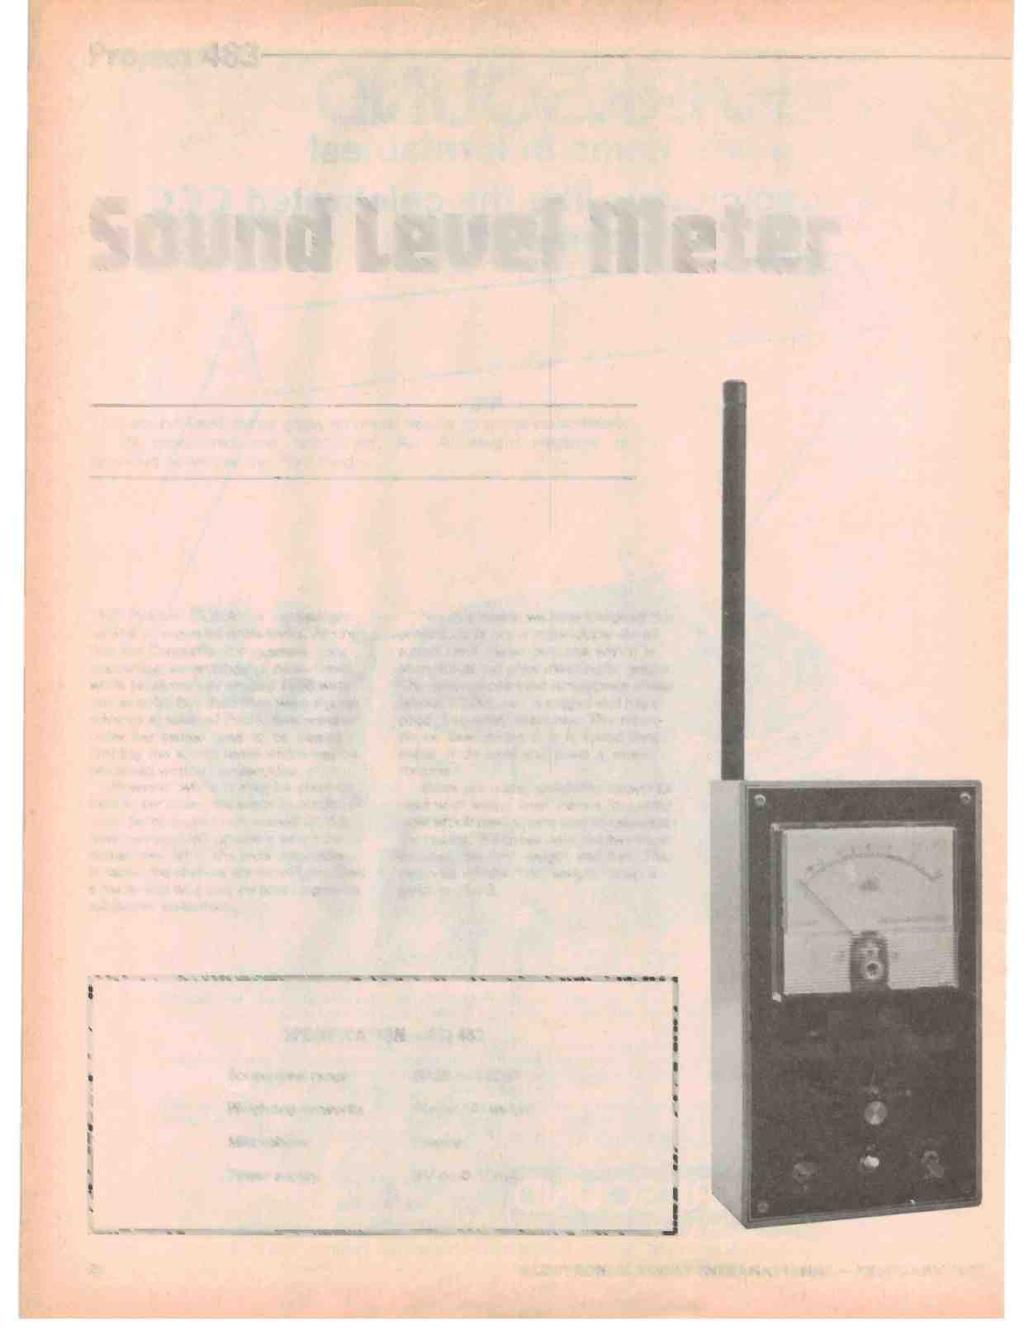 Project 483 Sound level Meter This sound level meter gives accurate results to allow noise levels to be monitored and controlled. An 'A' weight response is provided as well as the 'flat' mode.